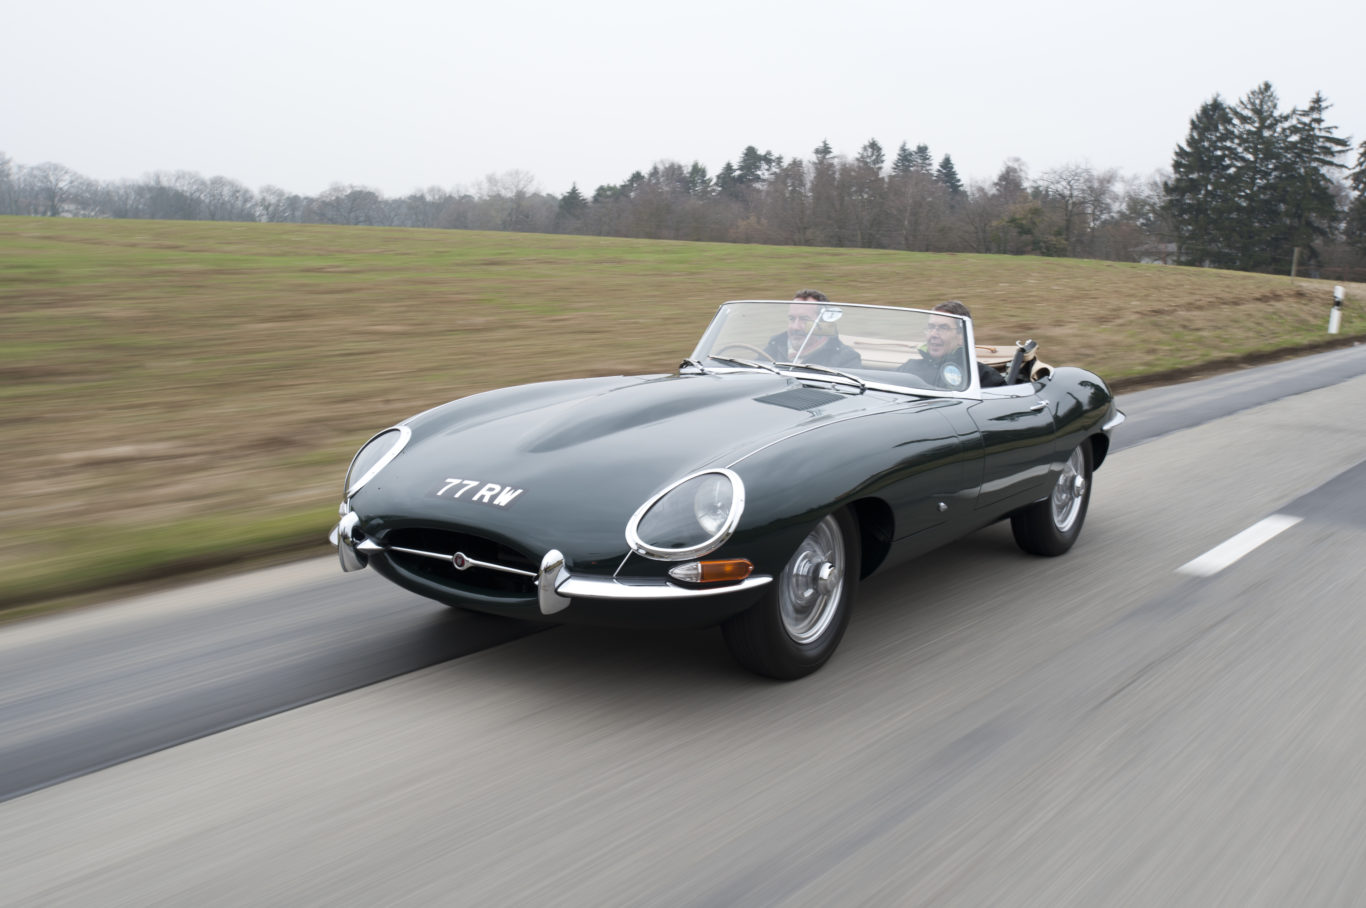 The E-Type is well-known across the world